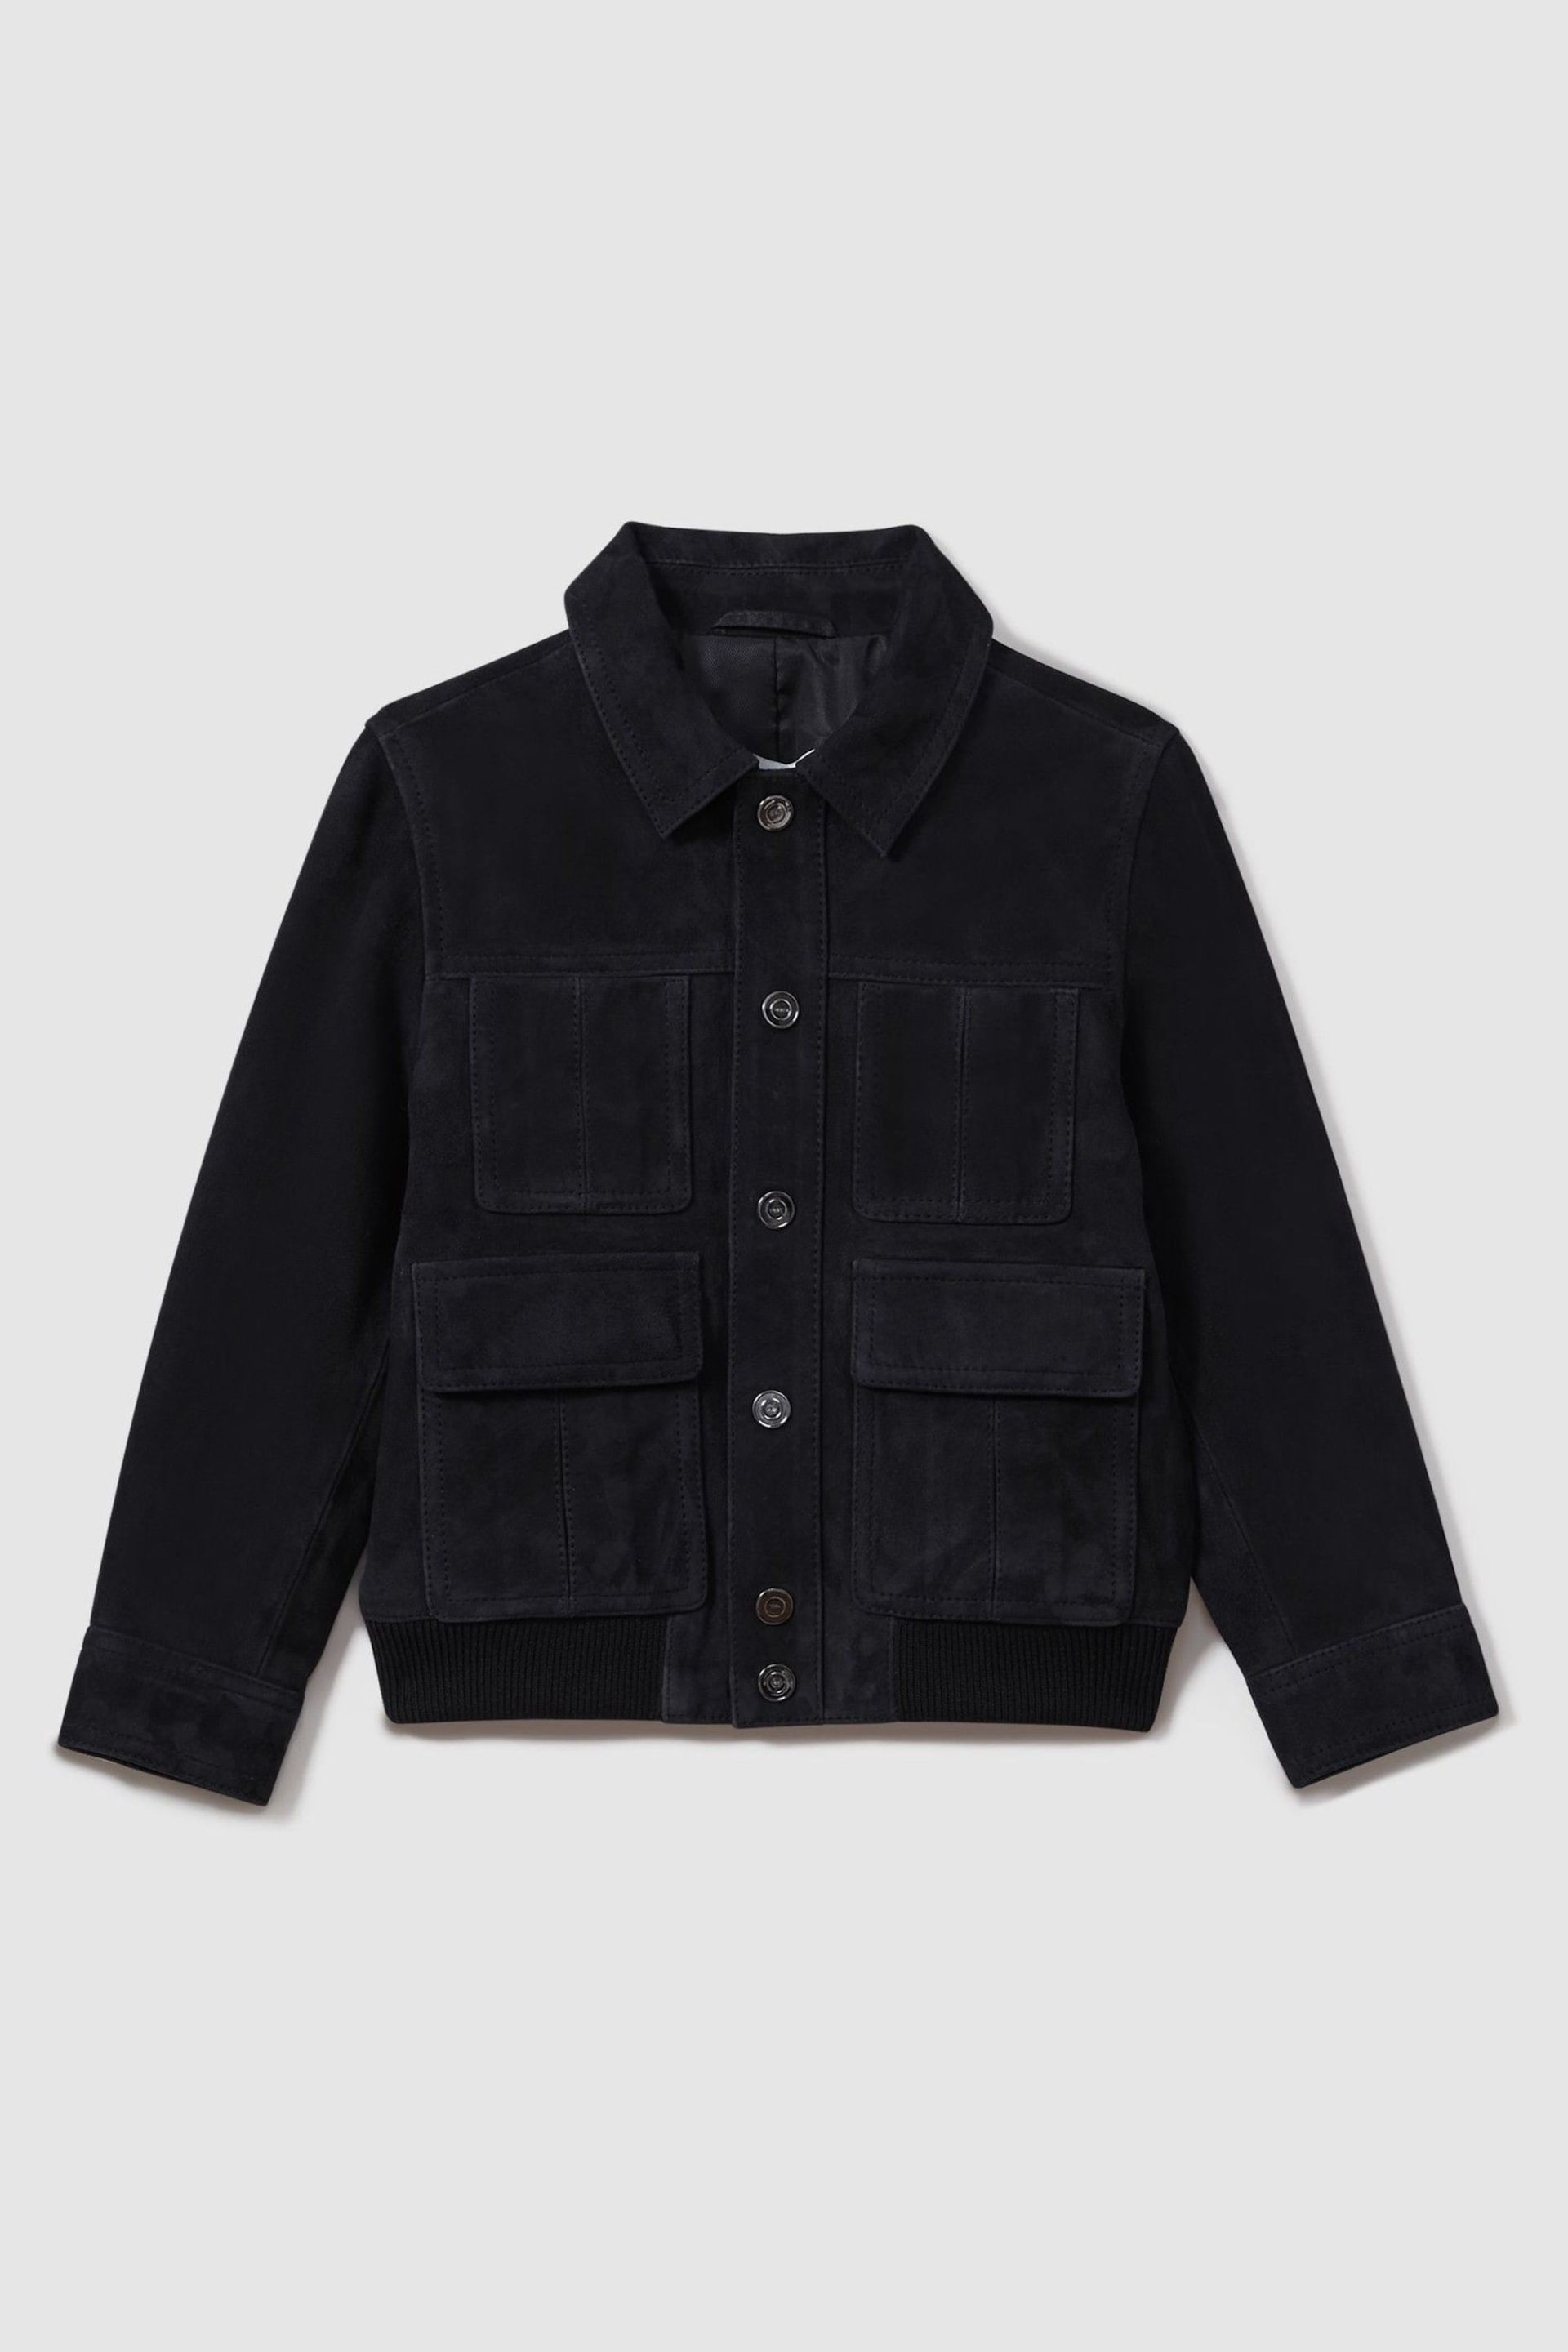 Reiss Navy Bas Teen Suede Front Pocket Jacket - Image 1 of 5